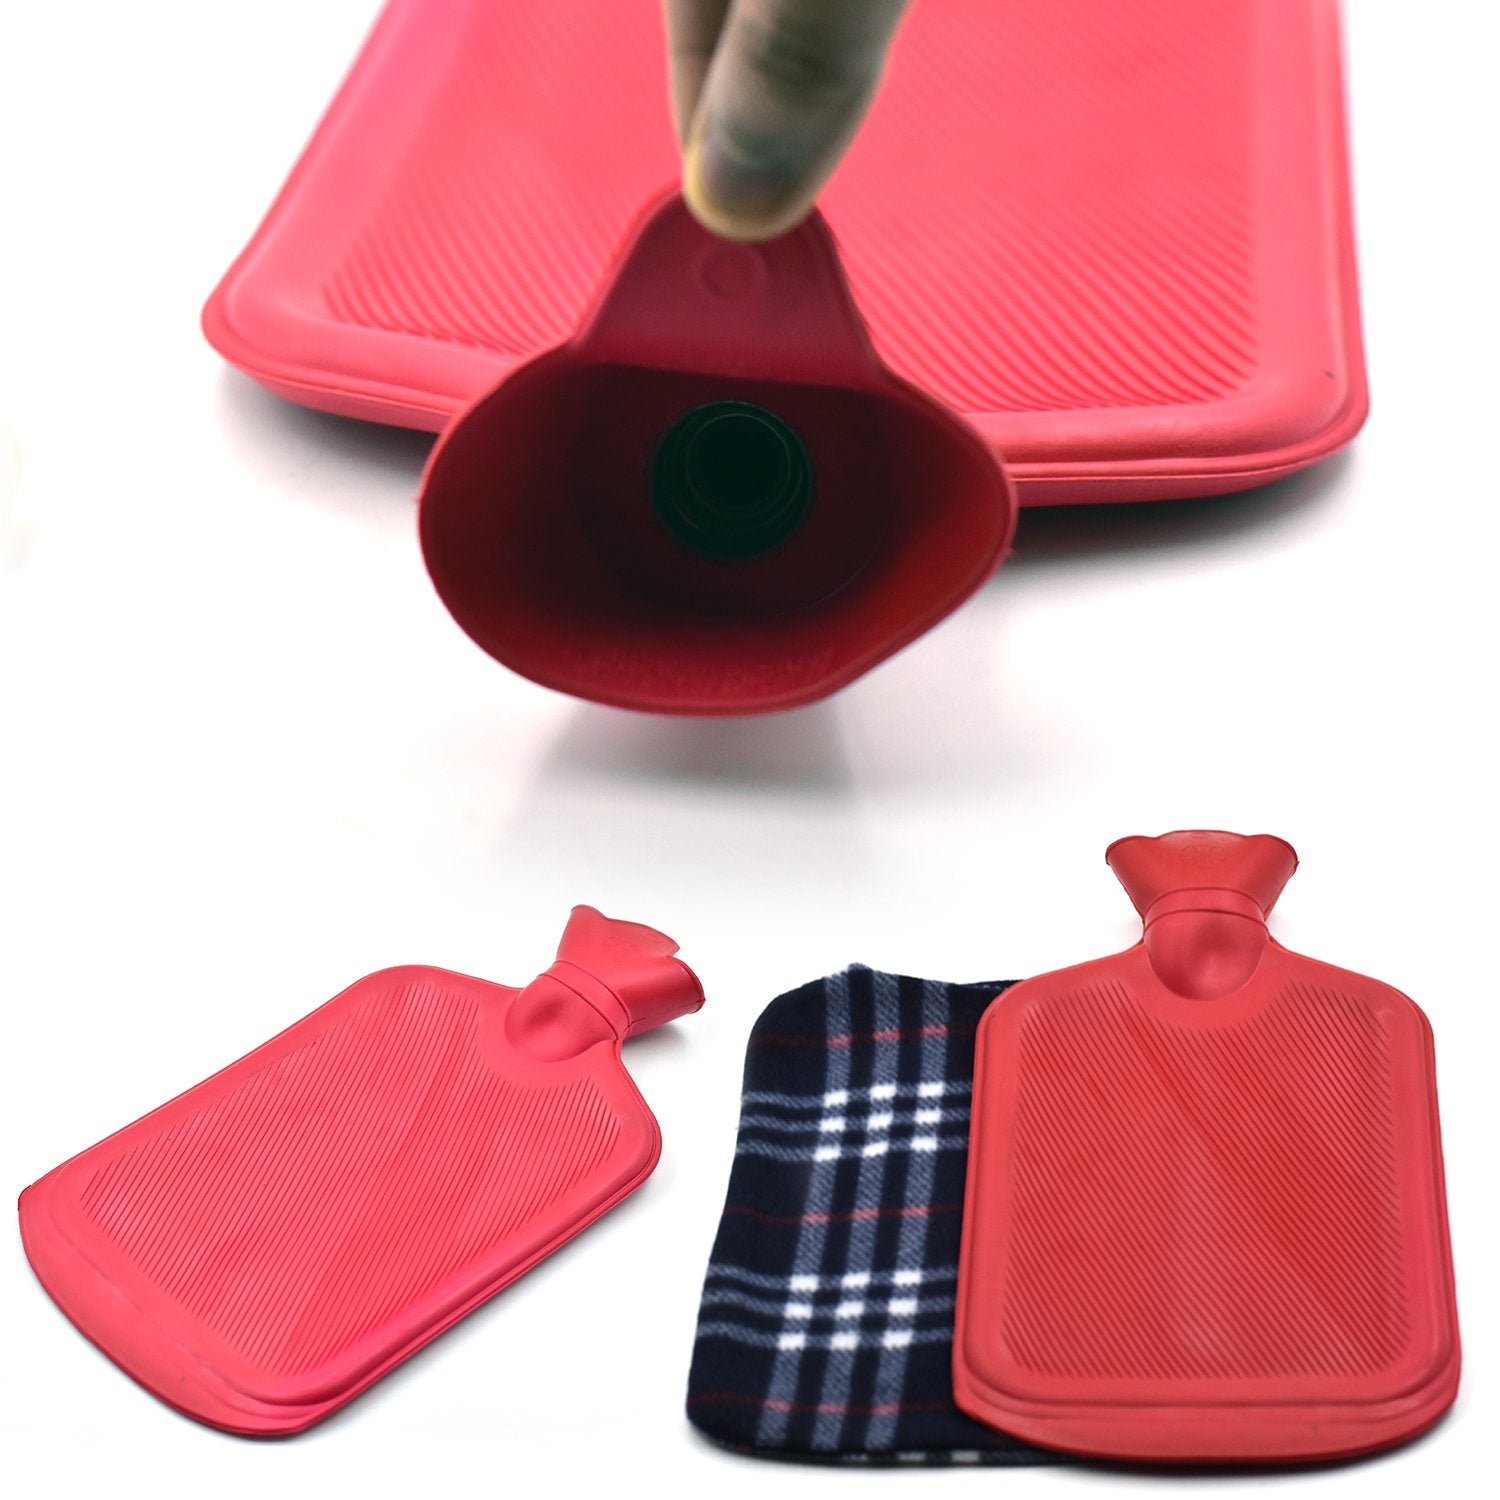 6076 (Large) Rubber Hot Water Heating Bag With Cover for Pain Relief